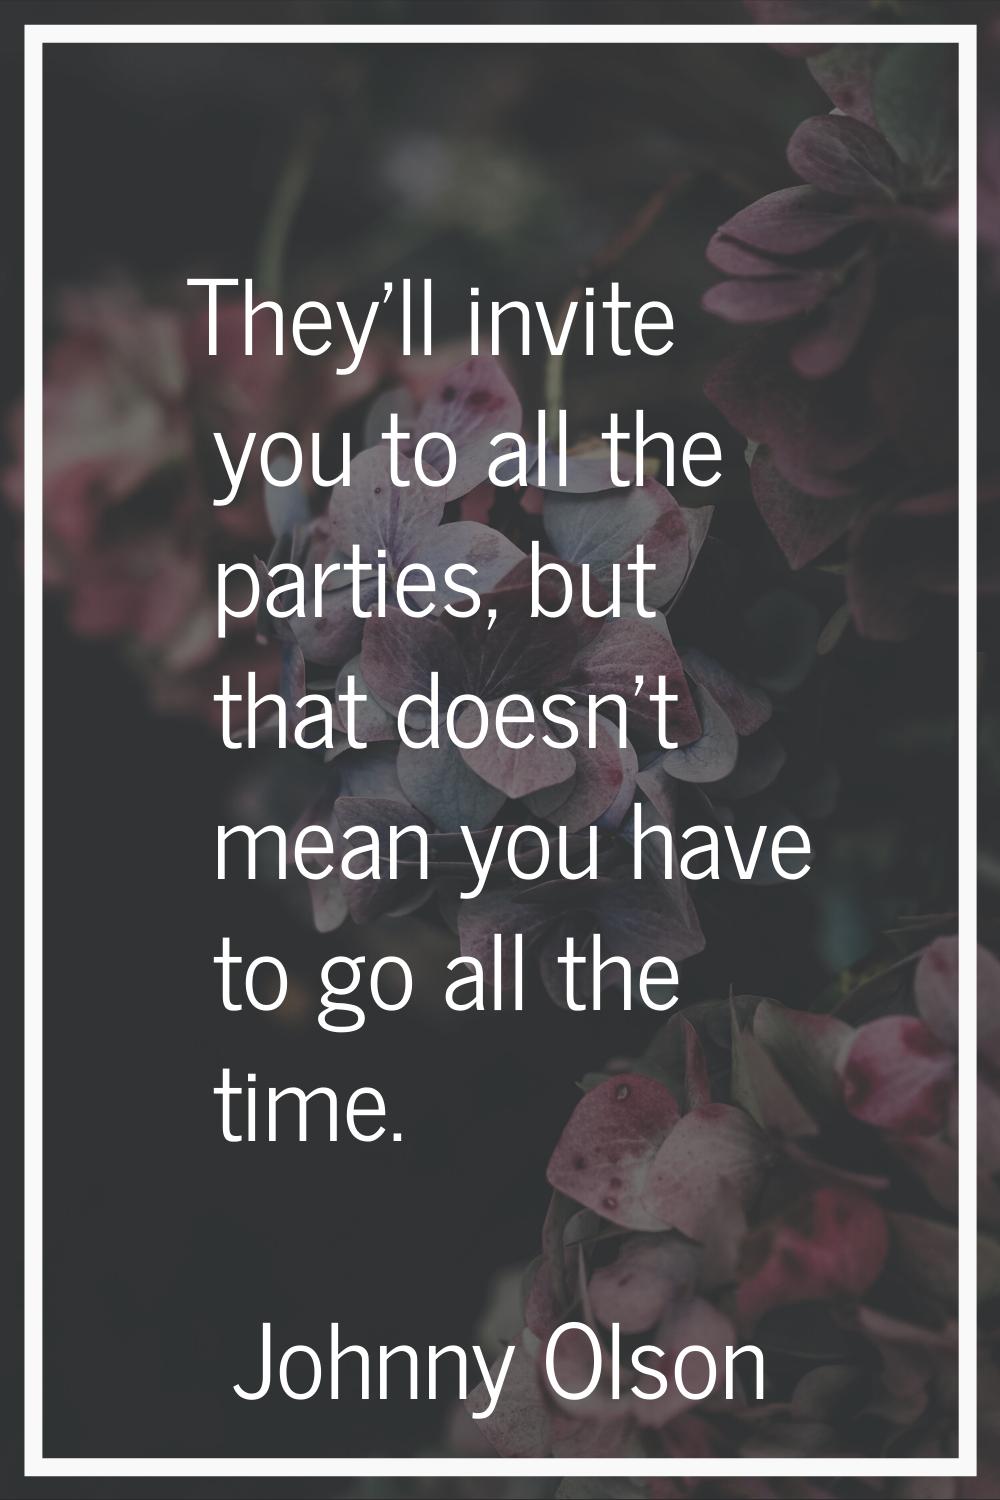 They'll invite you to all the parties, but that doesn't mean you have to go all the time.